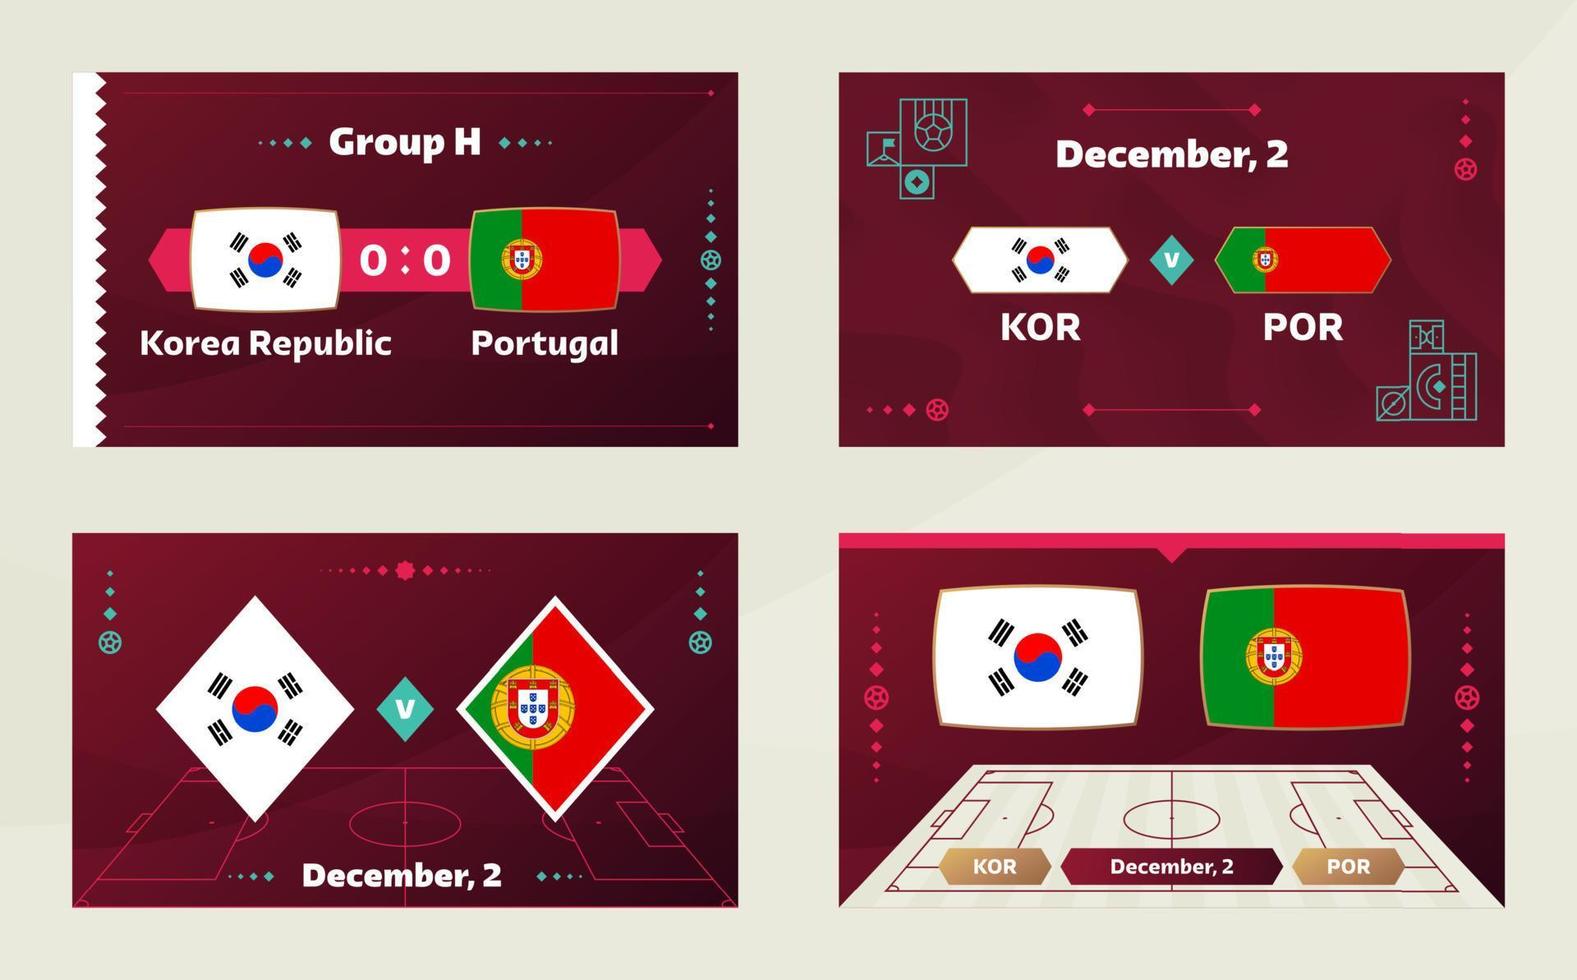 South Korea vs Portugal, Football 2022, Group H. World Football Competition championship match versus teams intro sport background, championship competition final poster, vector illustration.